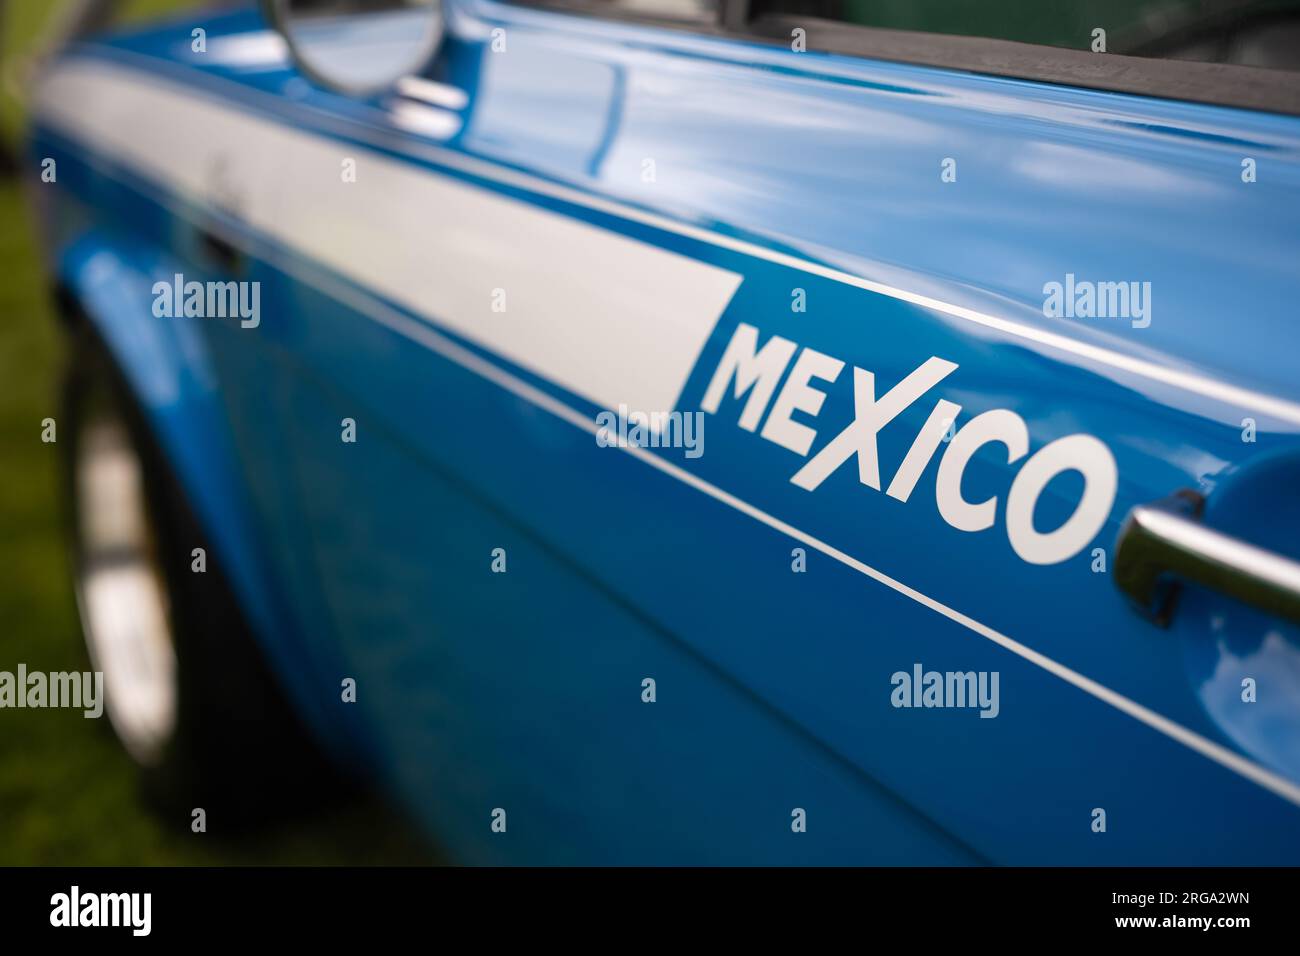 The left hand passenger side of a blue Mk1 Ford Escort Mexico vintage car showing the Mexico logo on the door. Stock Photo